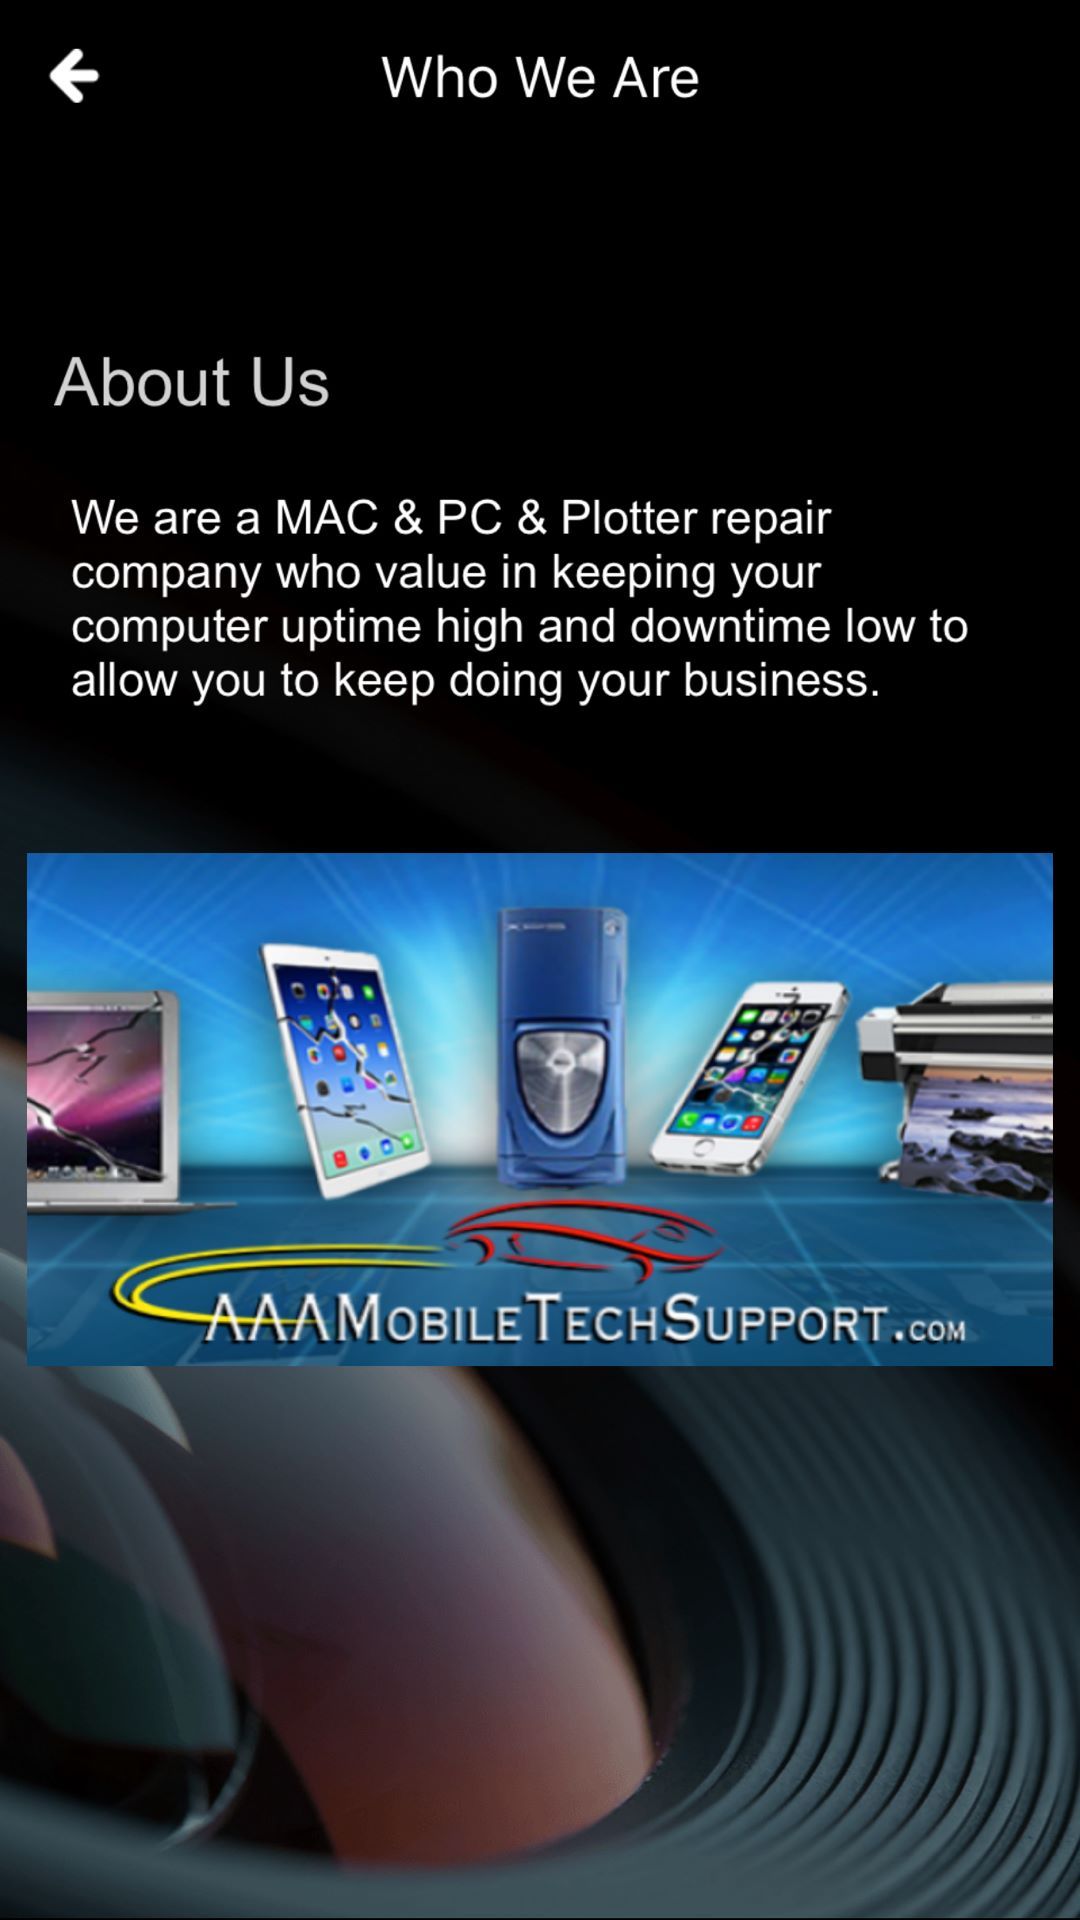 AAA Mobile Tech Support